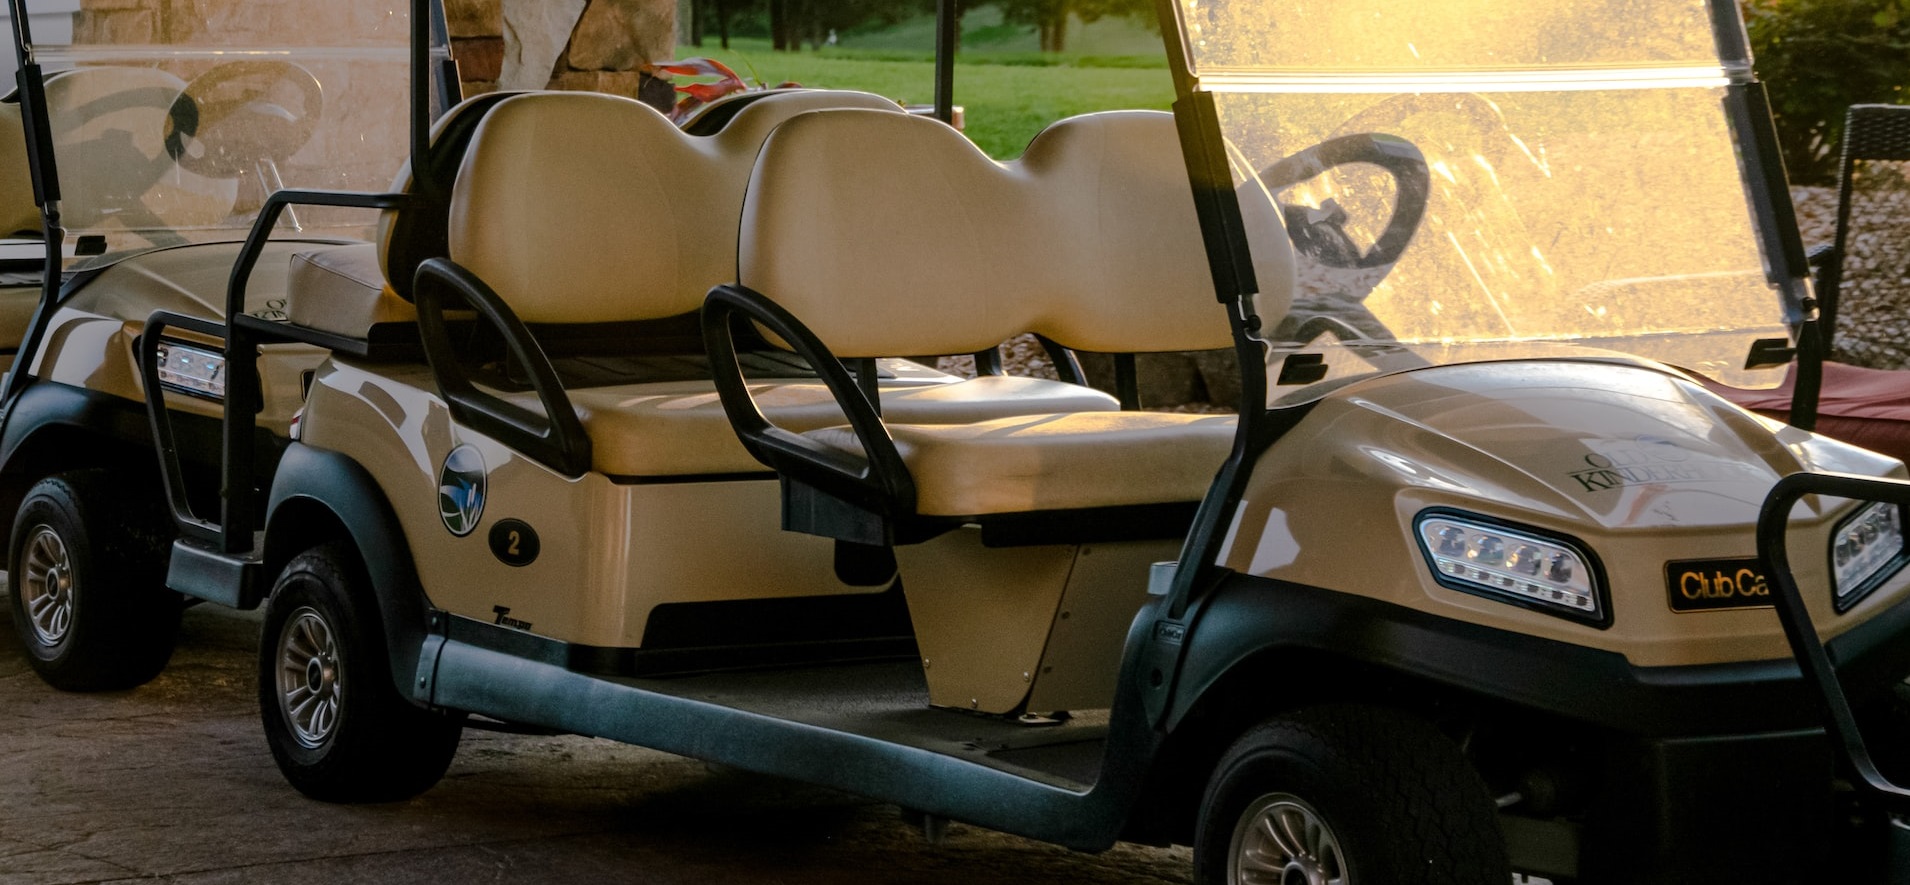 Biege Golf cart parked | Breast Cancer Car Donations